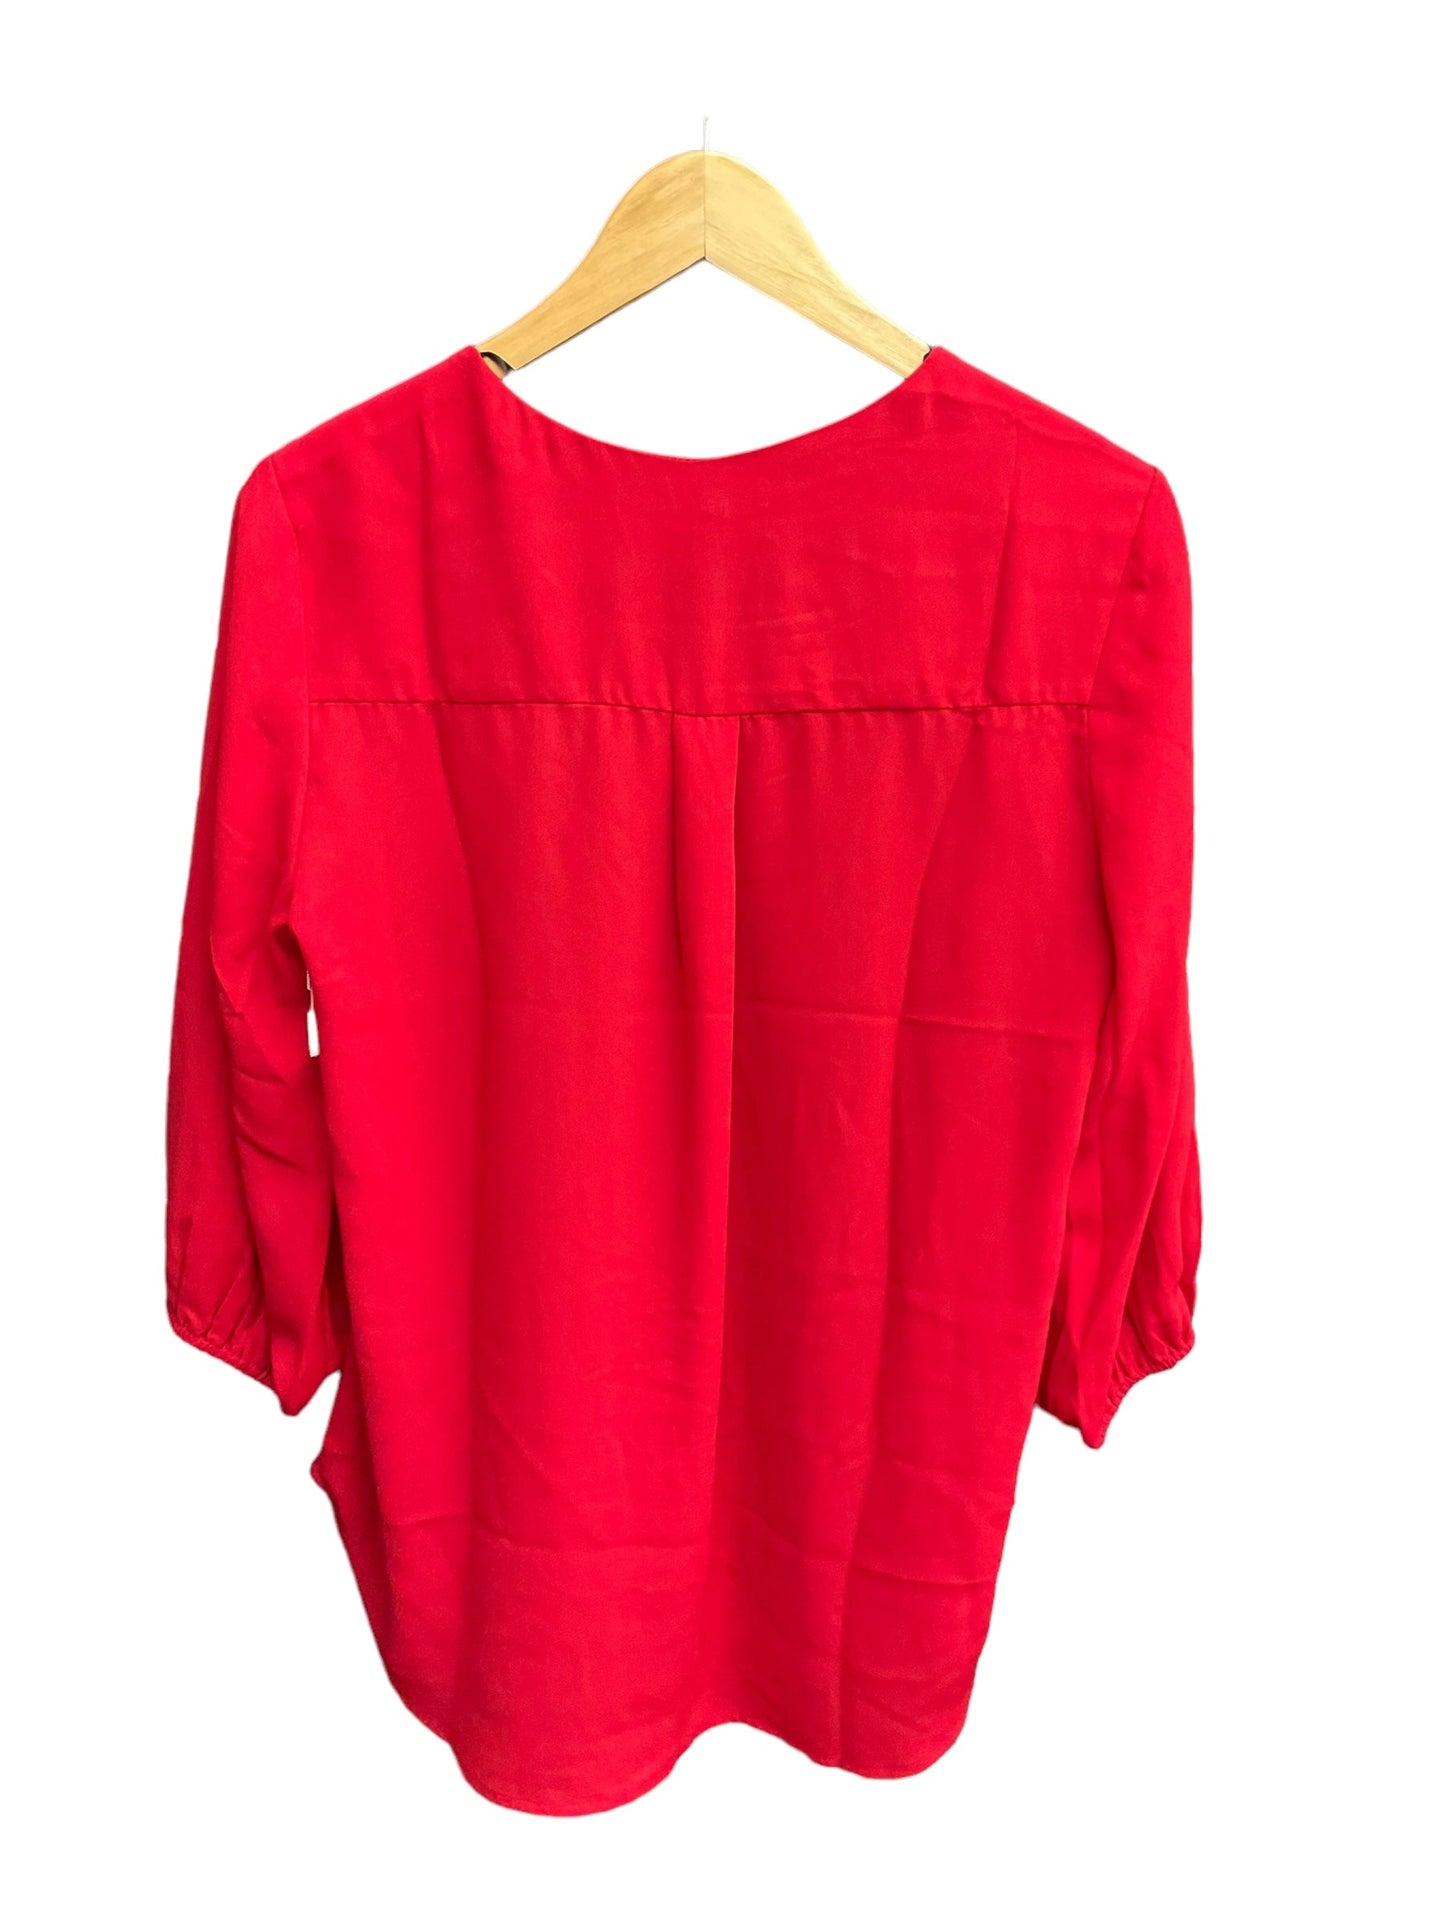 Red Top Long Sleeve Pleione, Size L